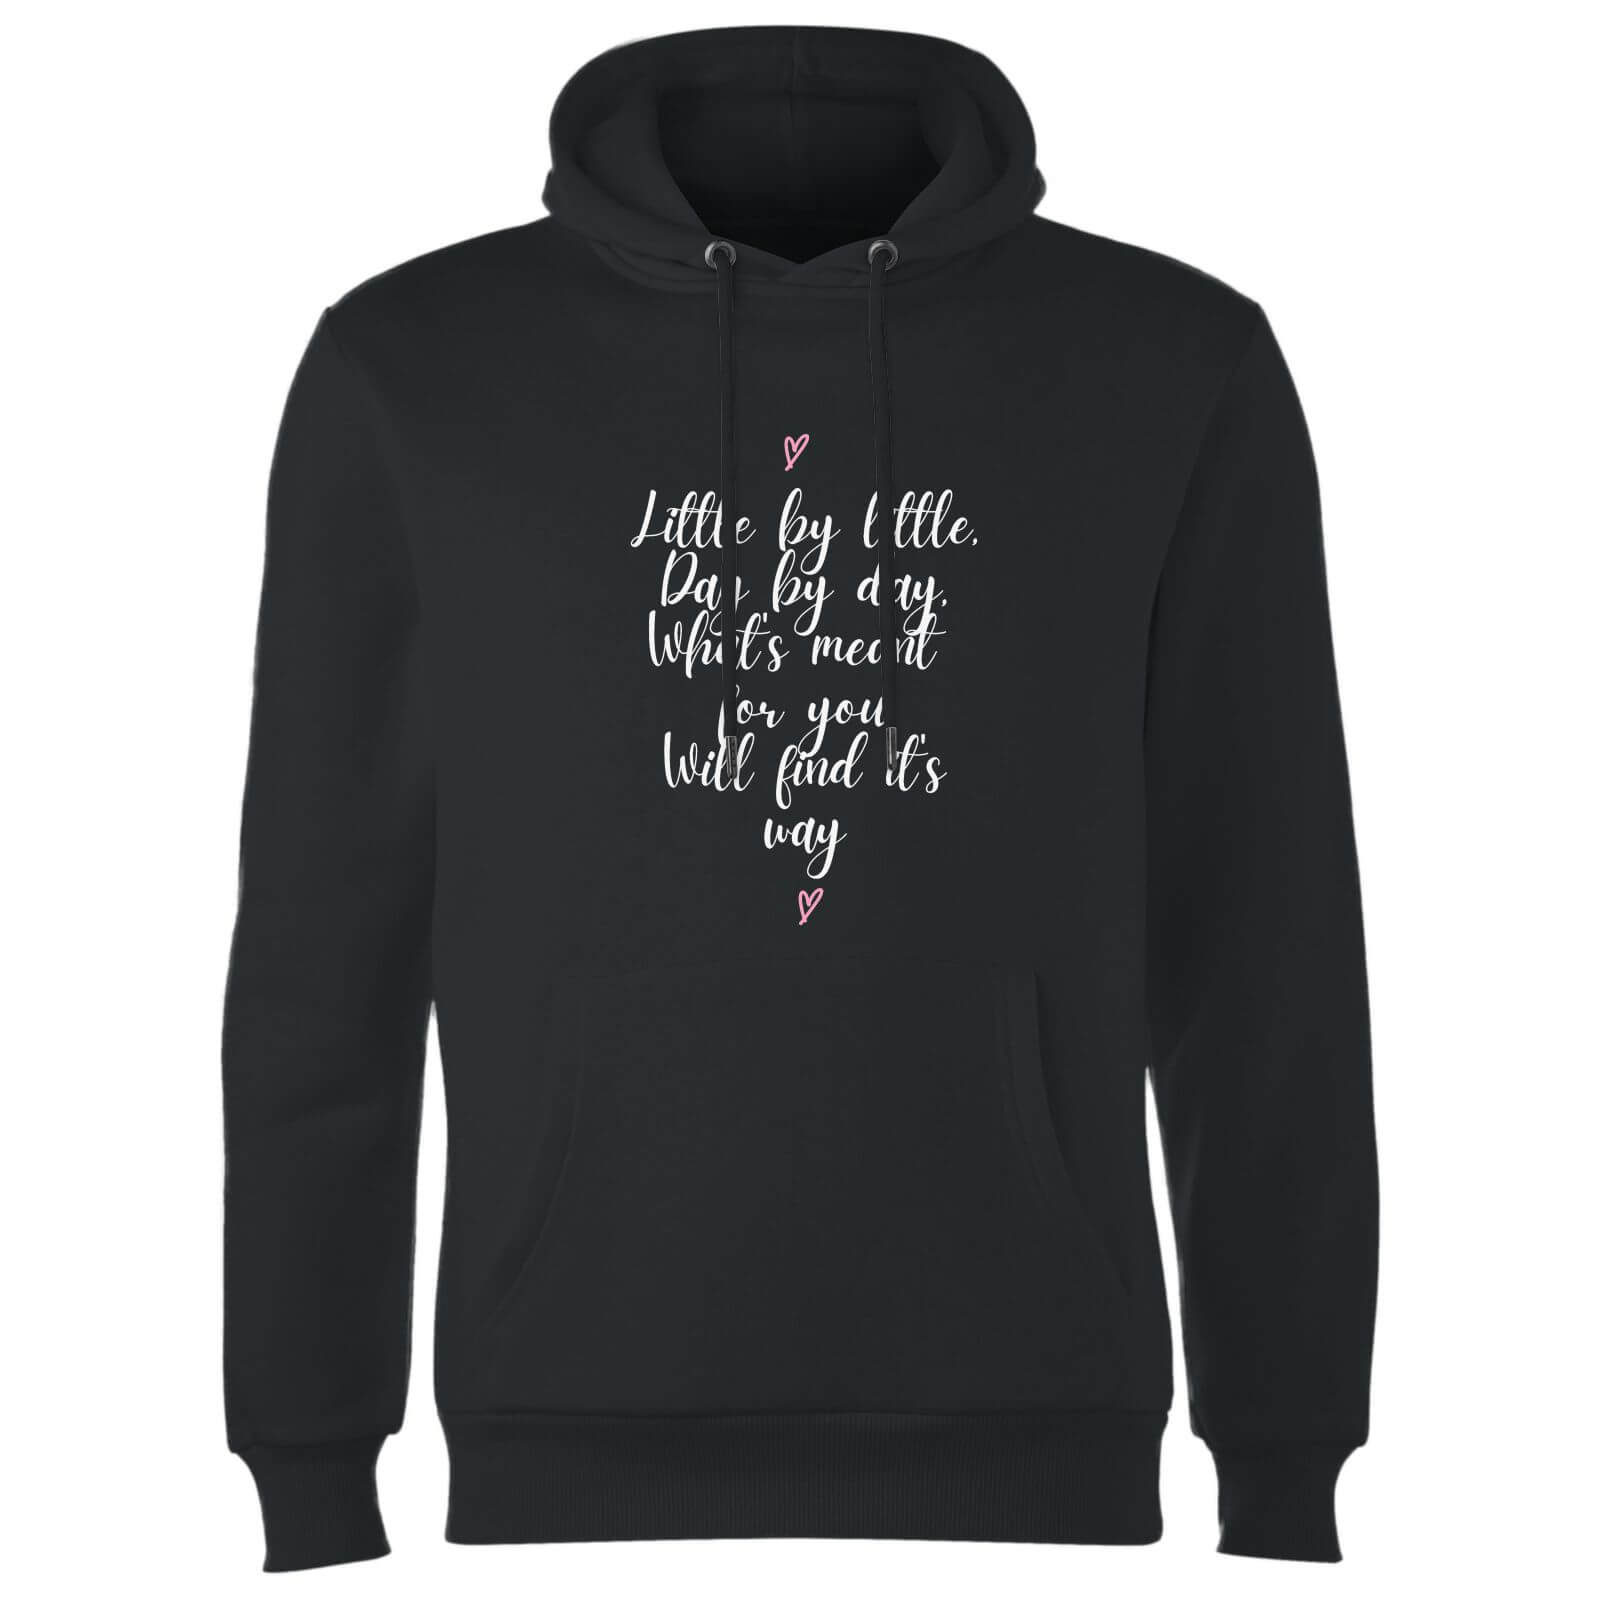 What's Meant For You Will Find It's Way Hoodie - Black - XL - Black